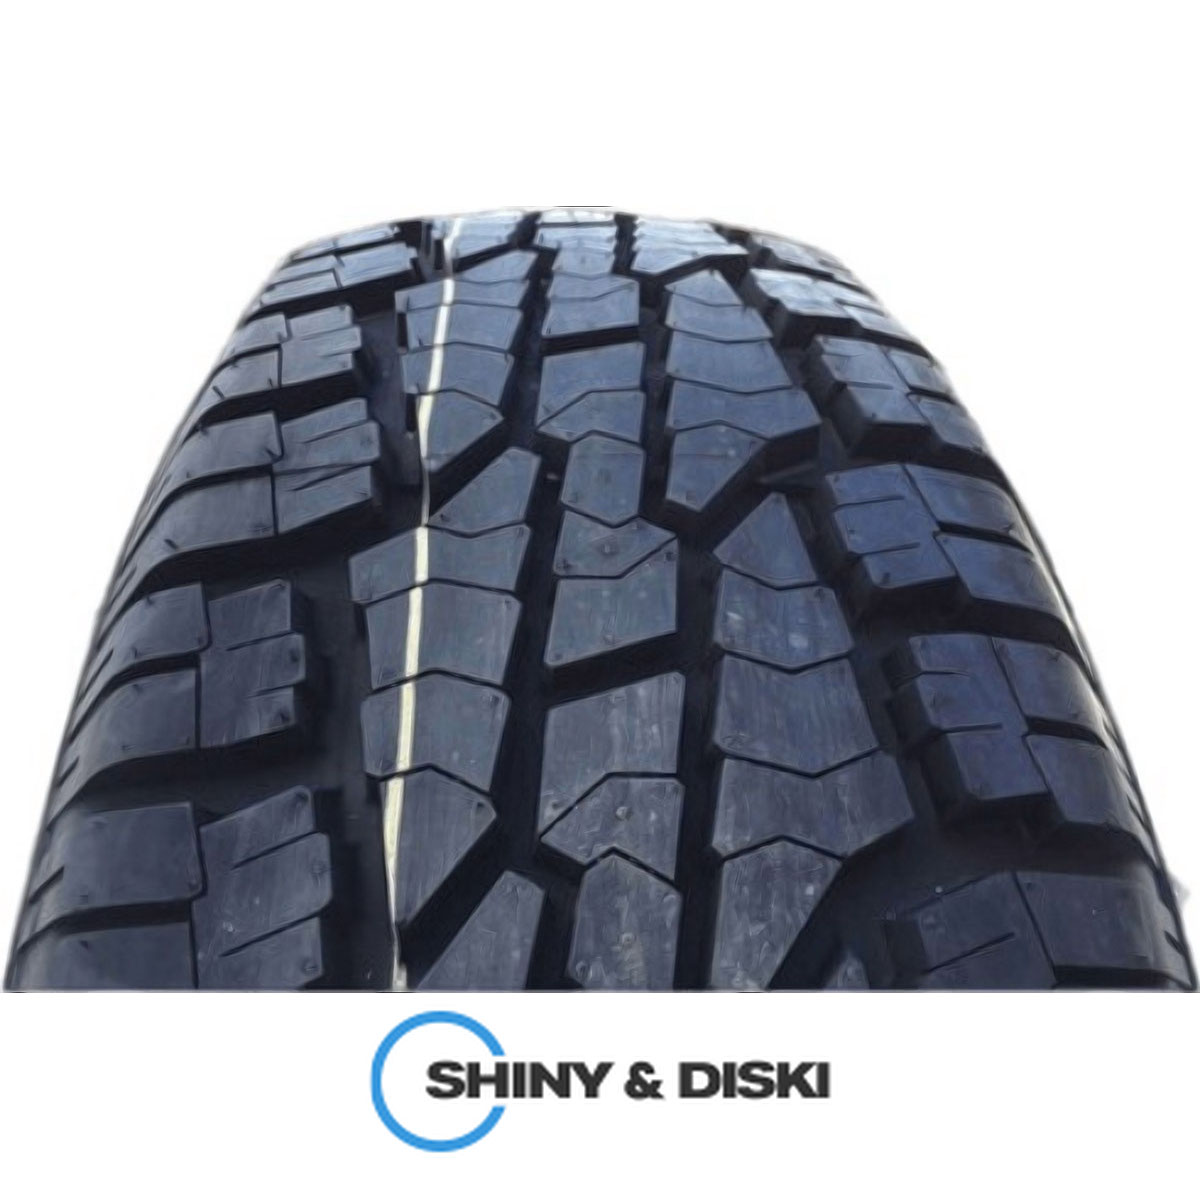 гума cachland ch-at7001 245/75 r16 120/116s